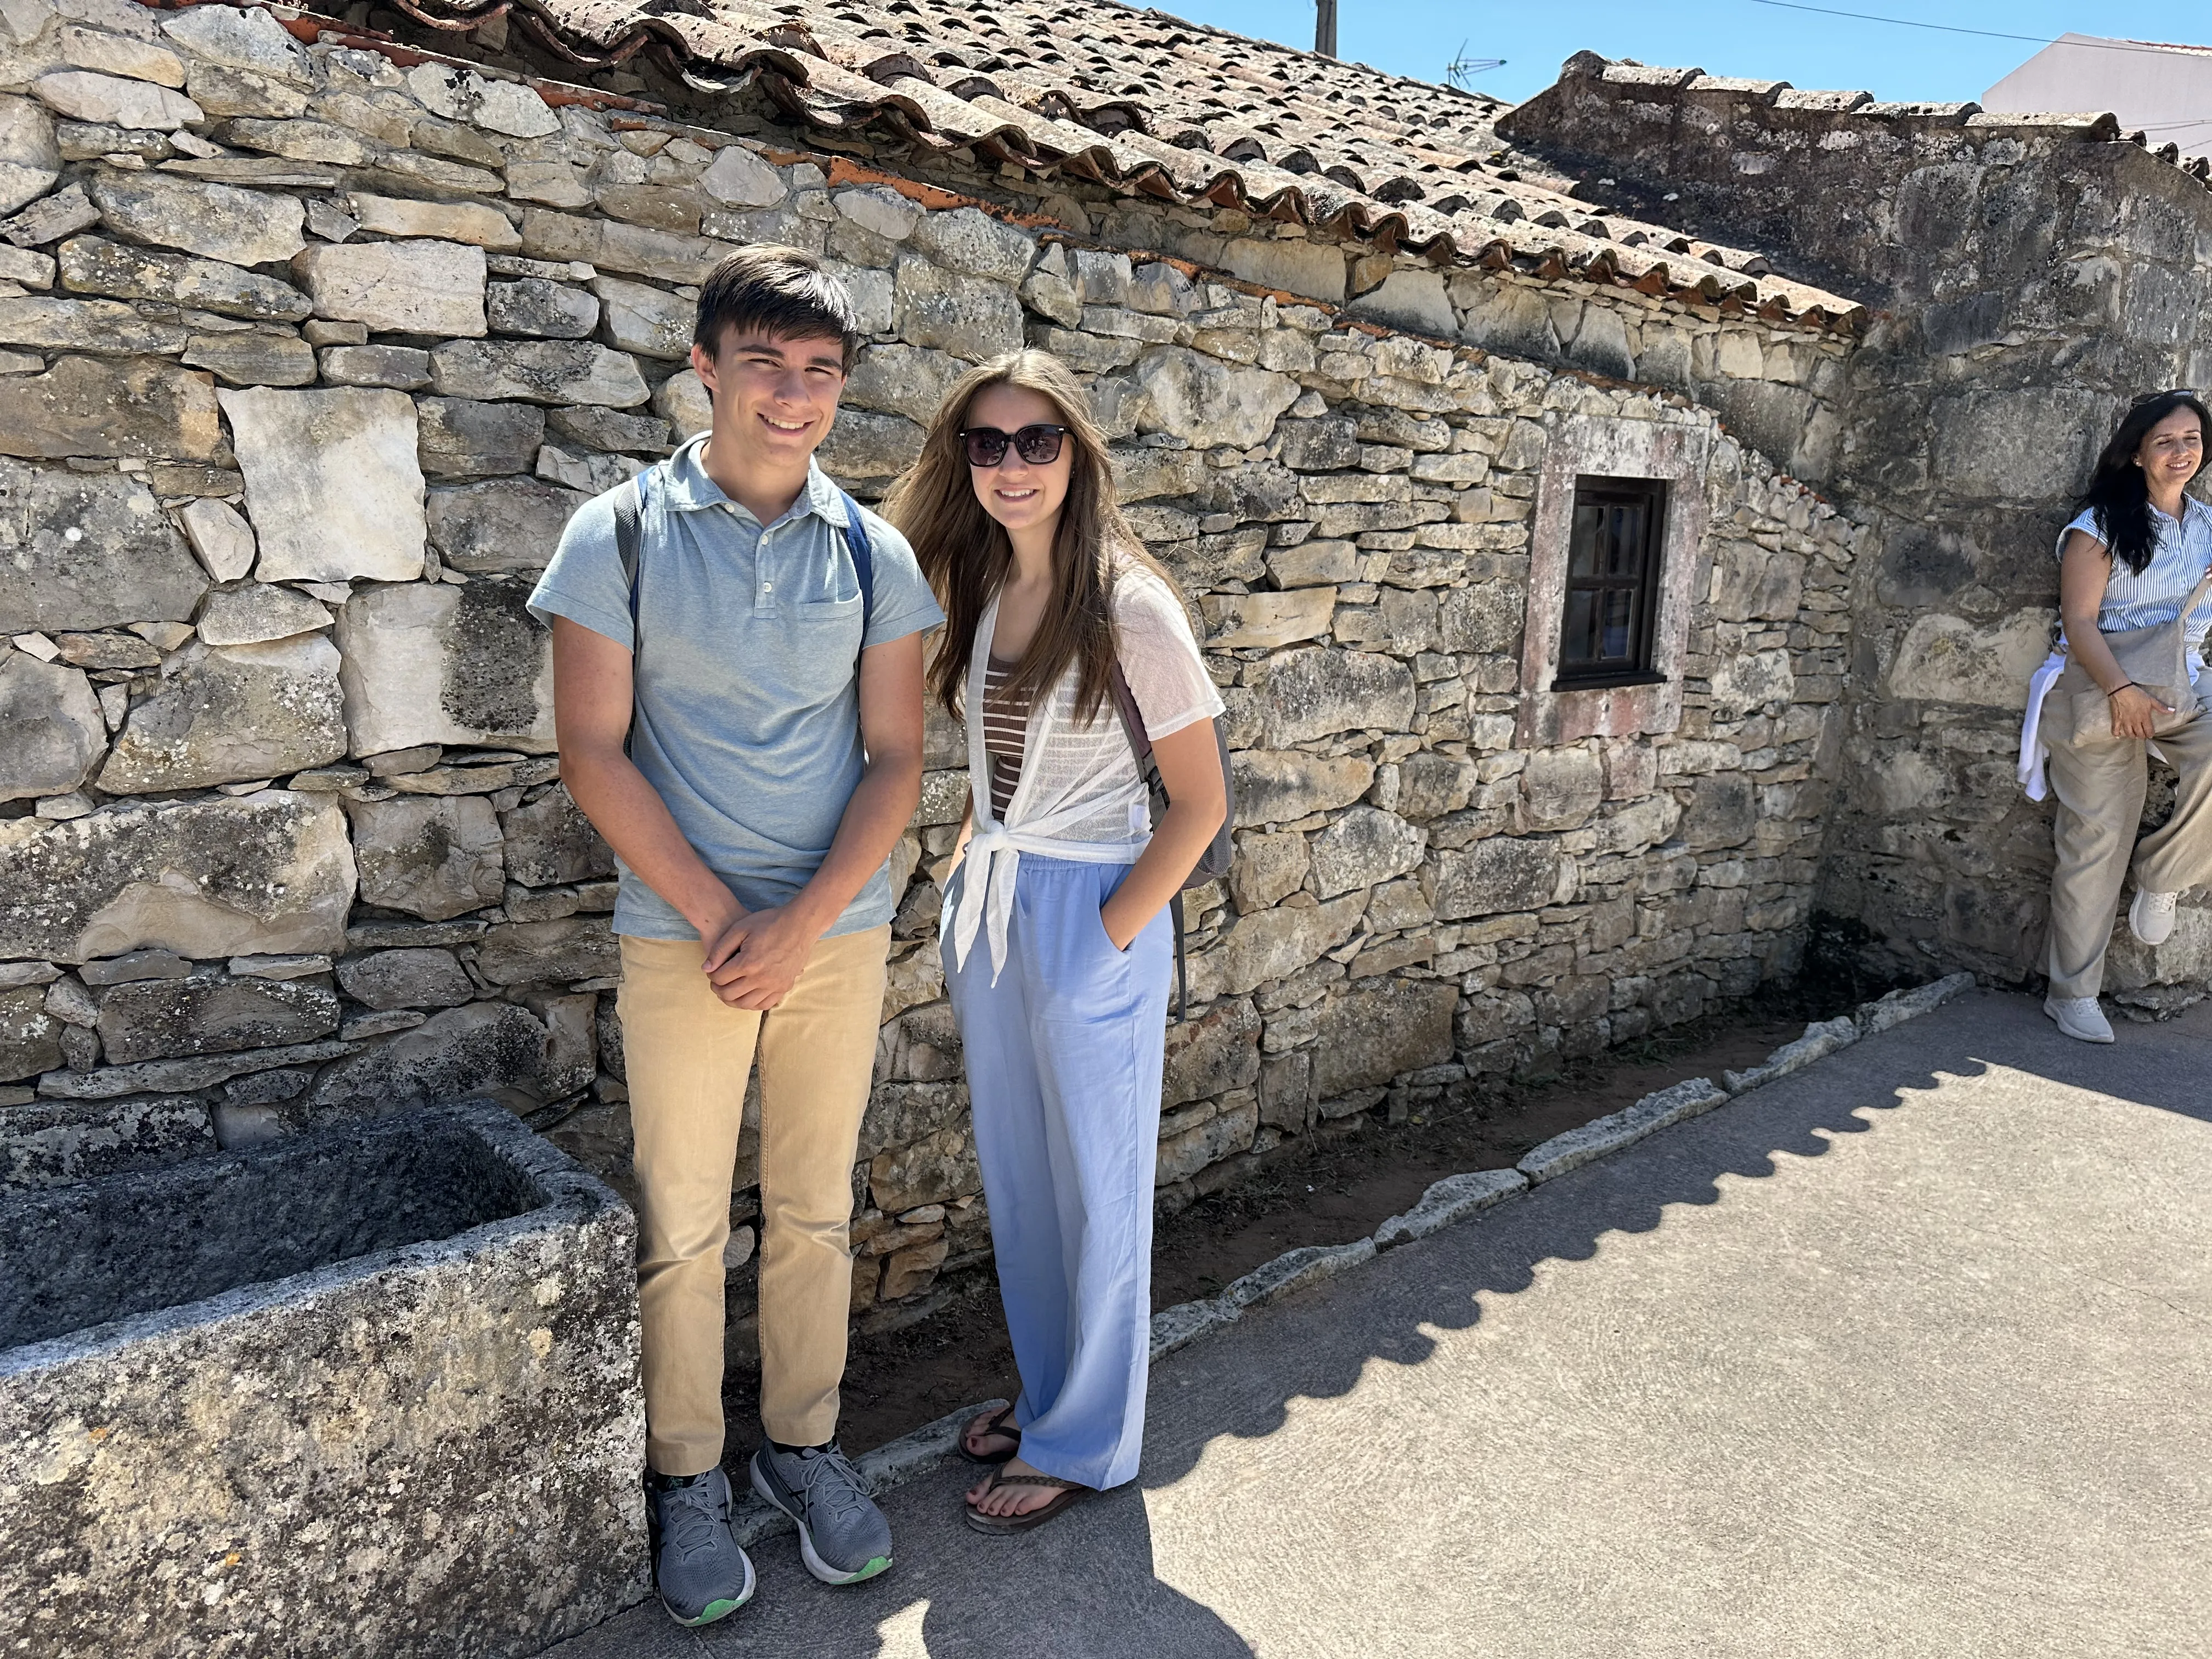 Thomas and Rosie Love outside of the home of Jacinta and Francisco Marto in Fatima, Portugal. Photo credit: Alexis Love